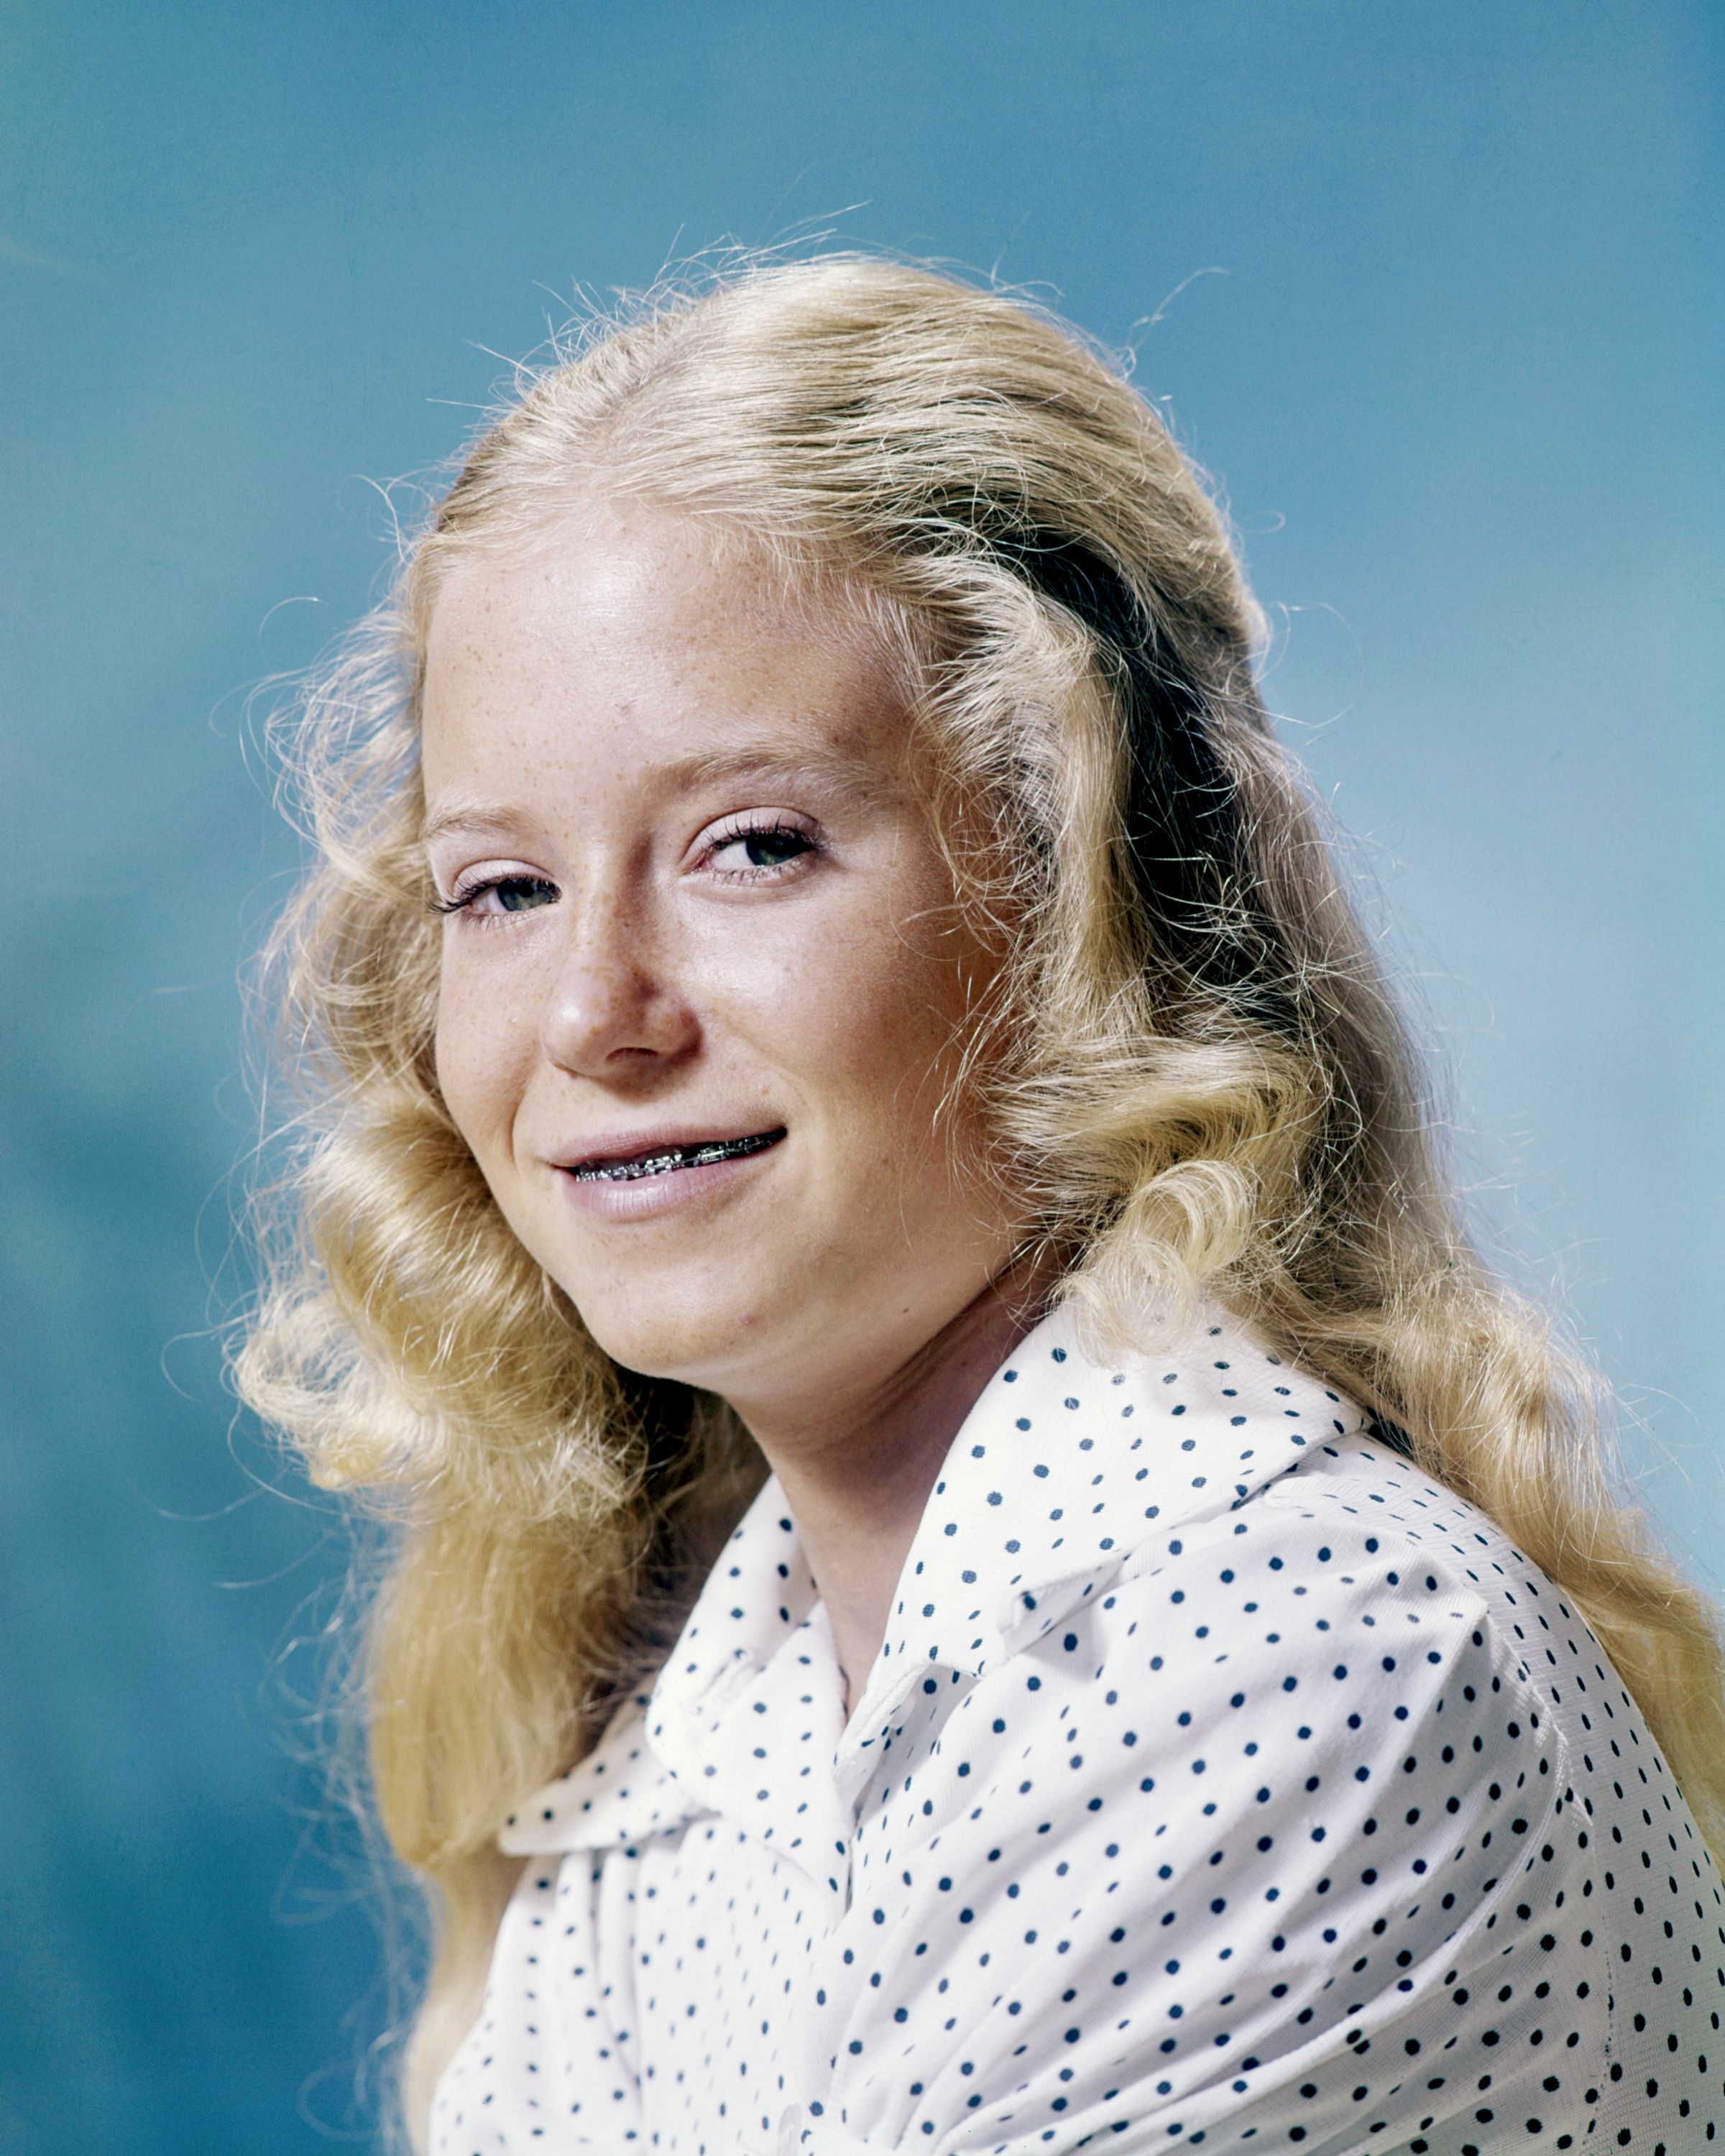 How Brady Bunch Star Eve Plumb Looked Like When She Was